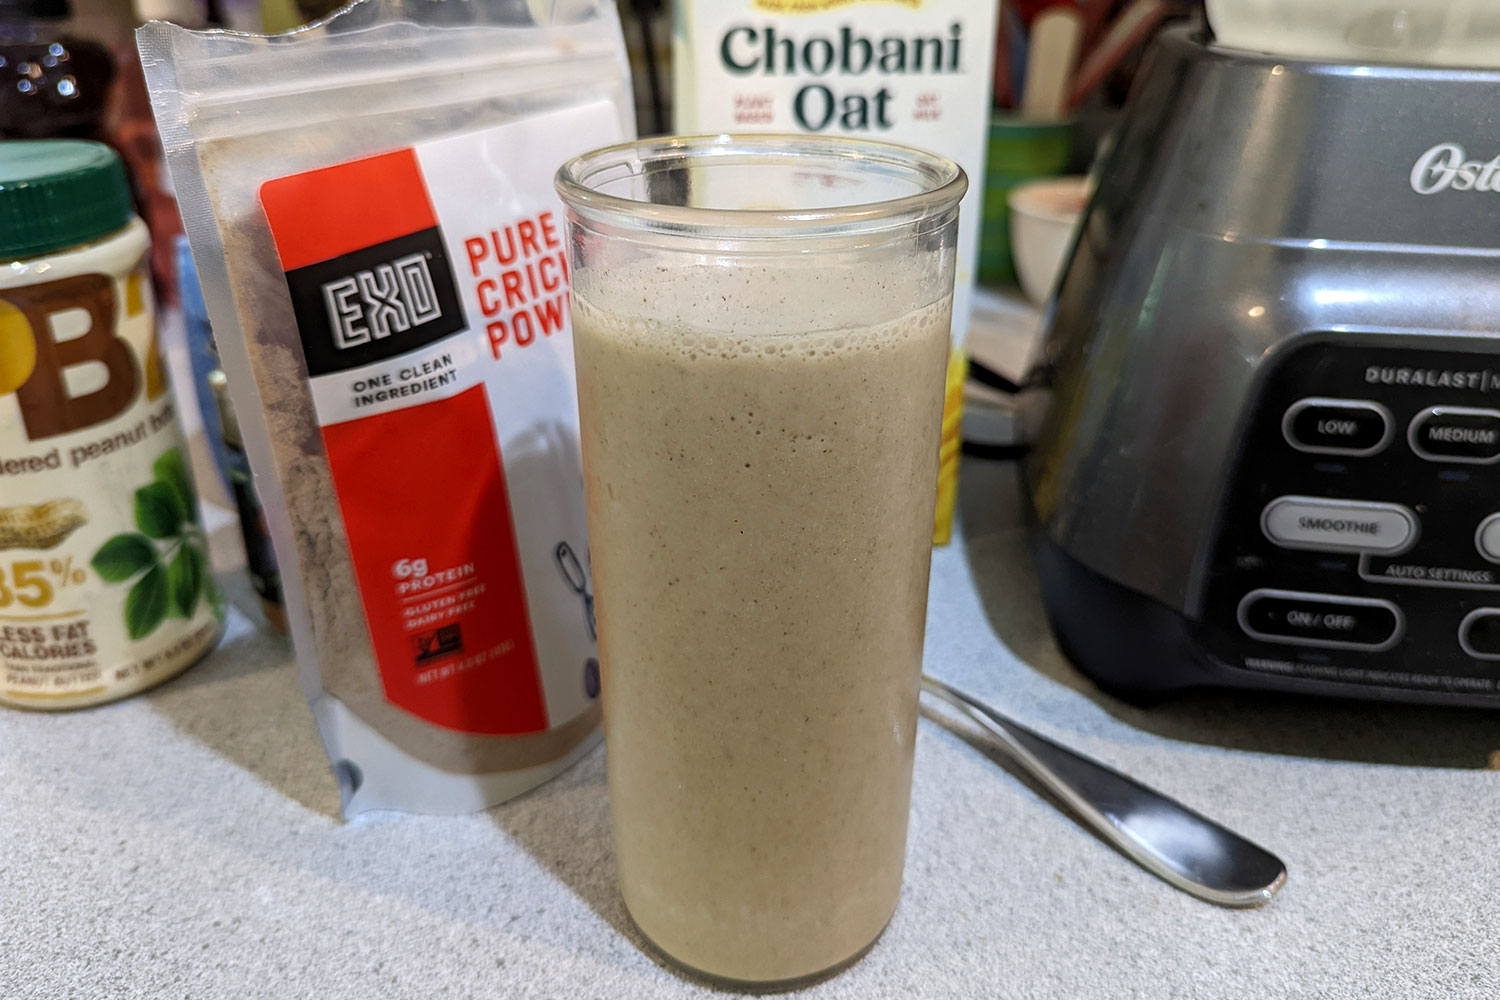 Light brown smoothie in glass cup placed in front of a bag of pure cricket powder